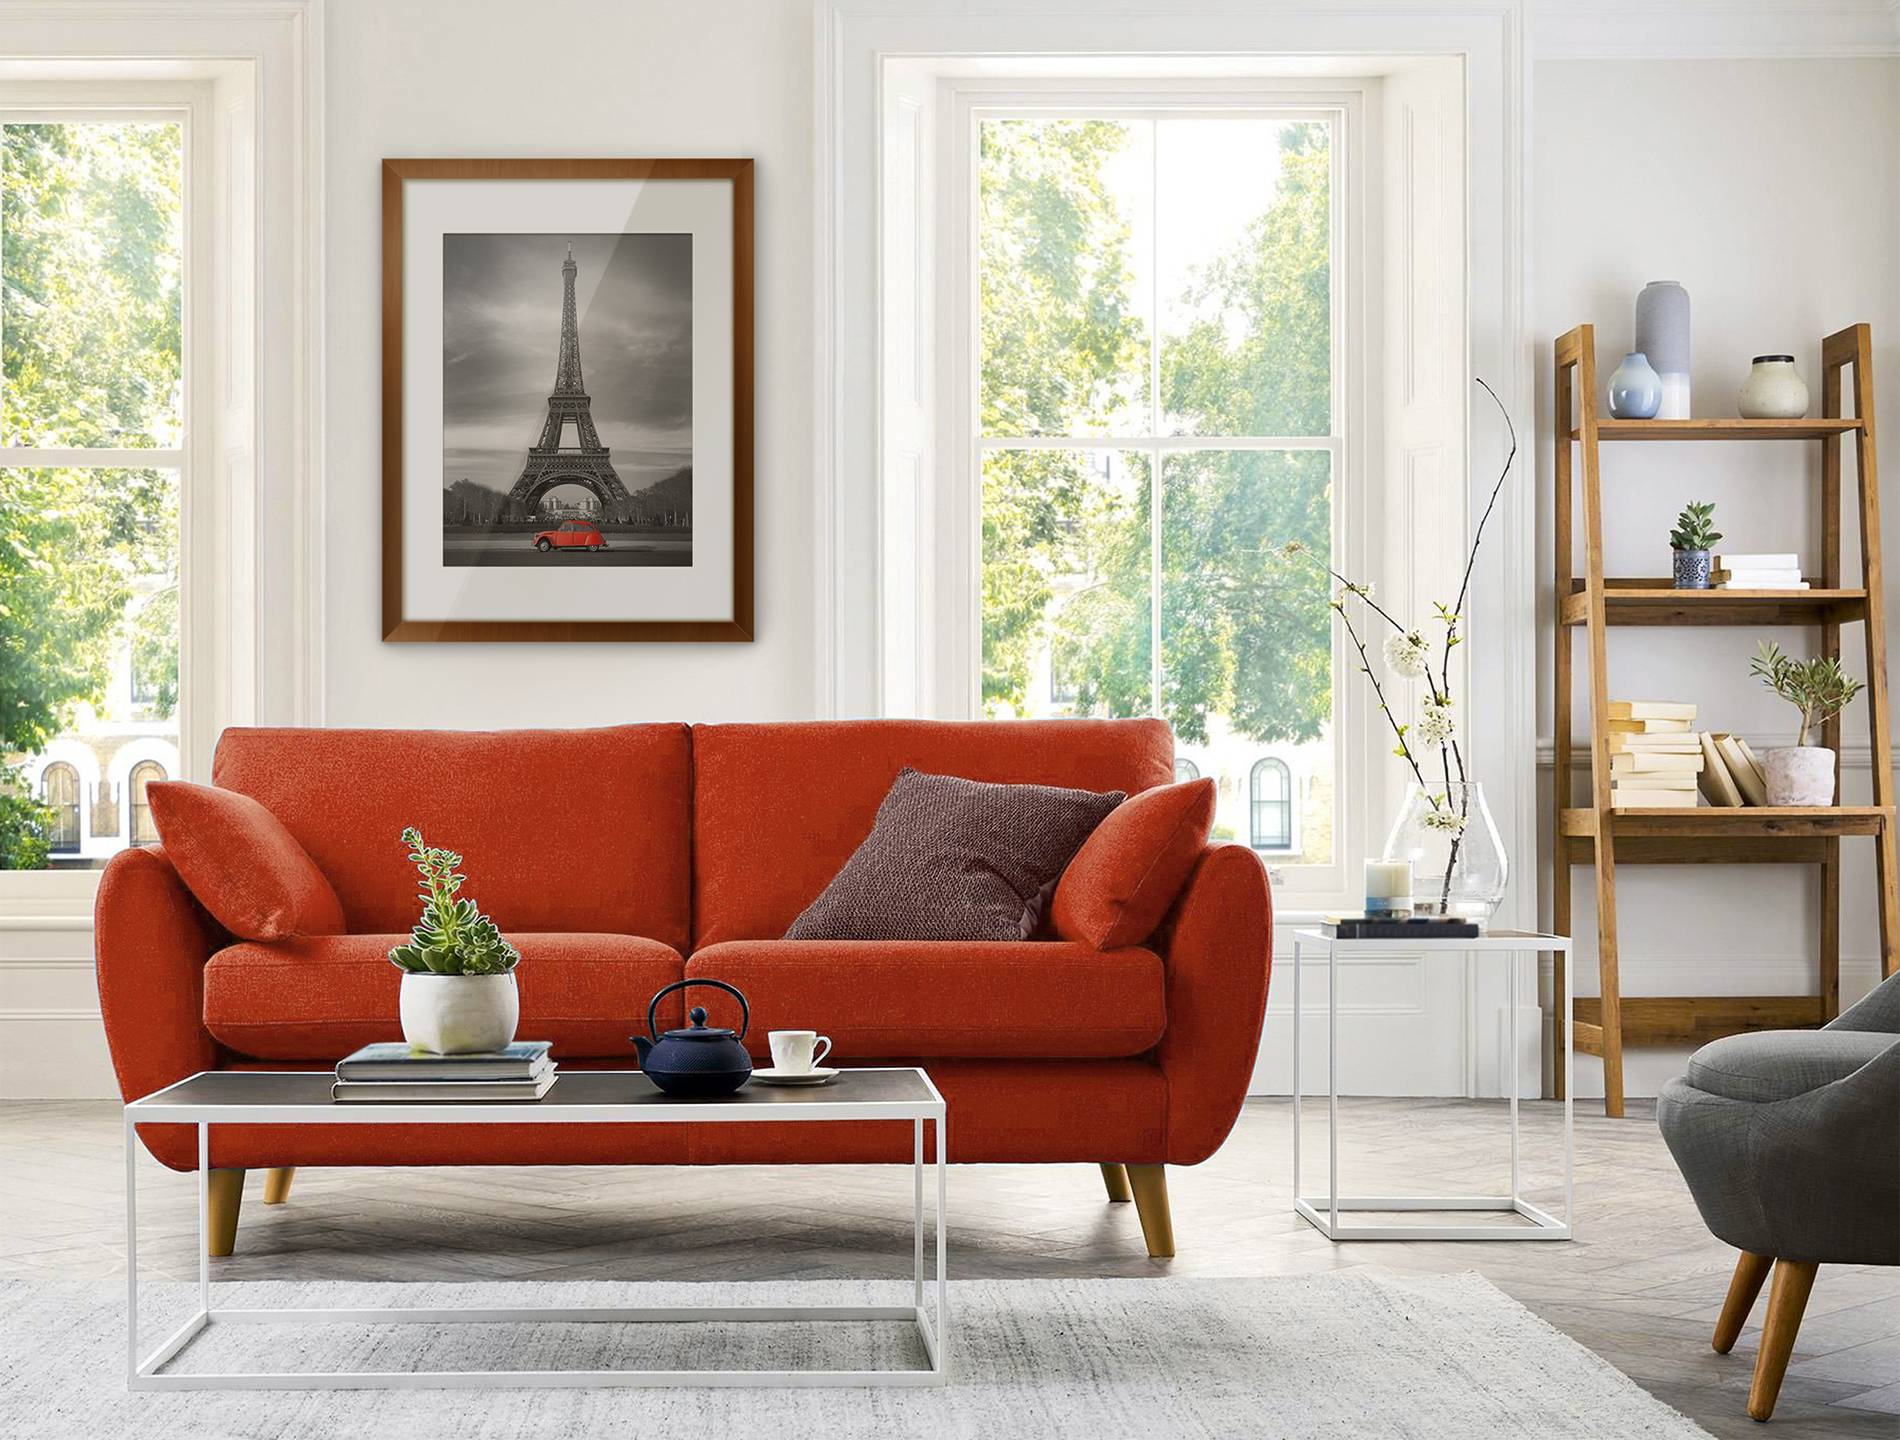 Parisian accent • Living room - Contemporary - Architecture and buildings - Prints - Posters